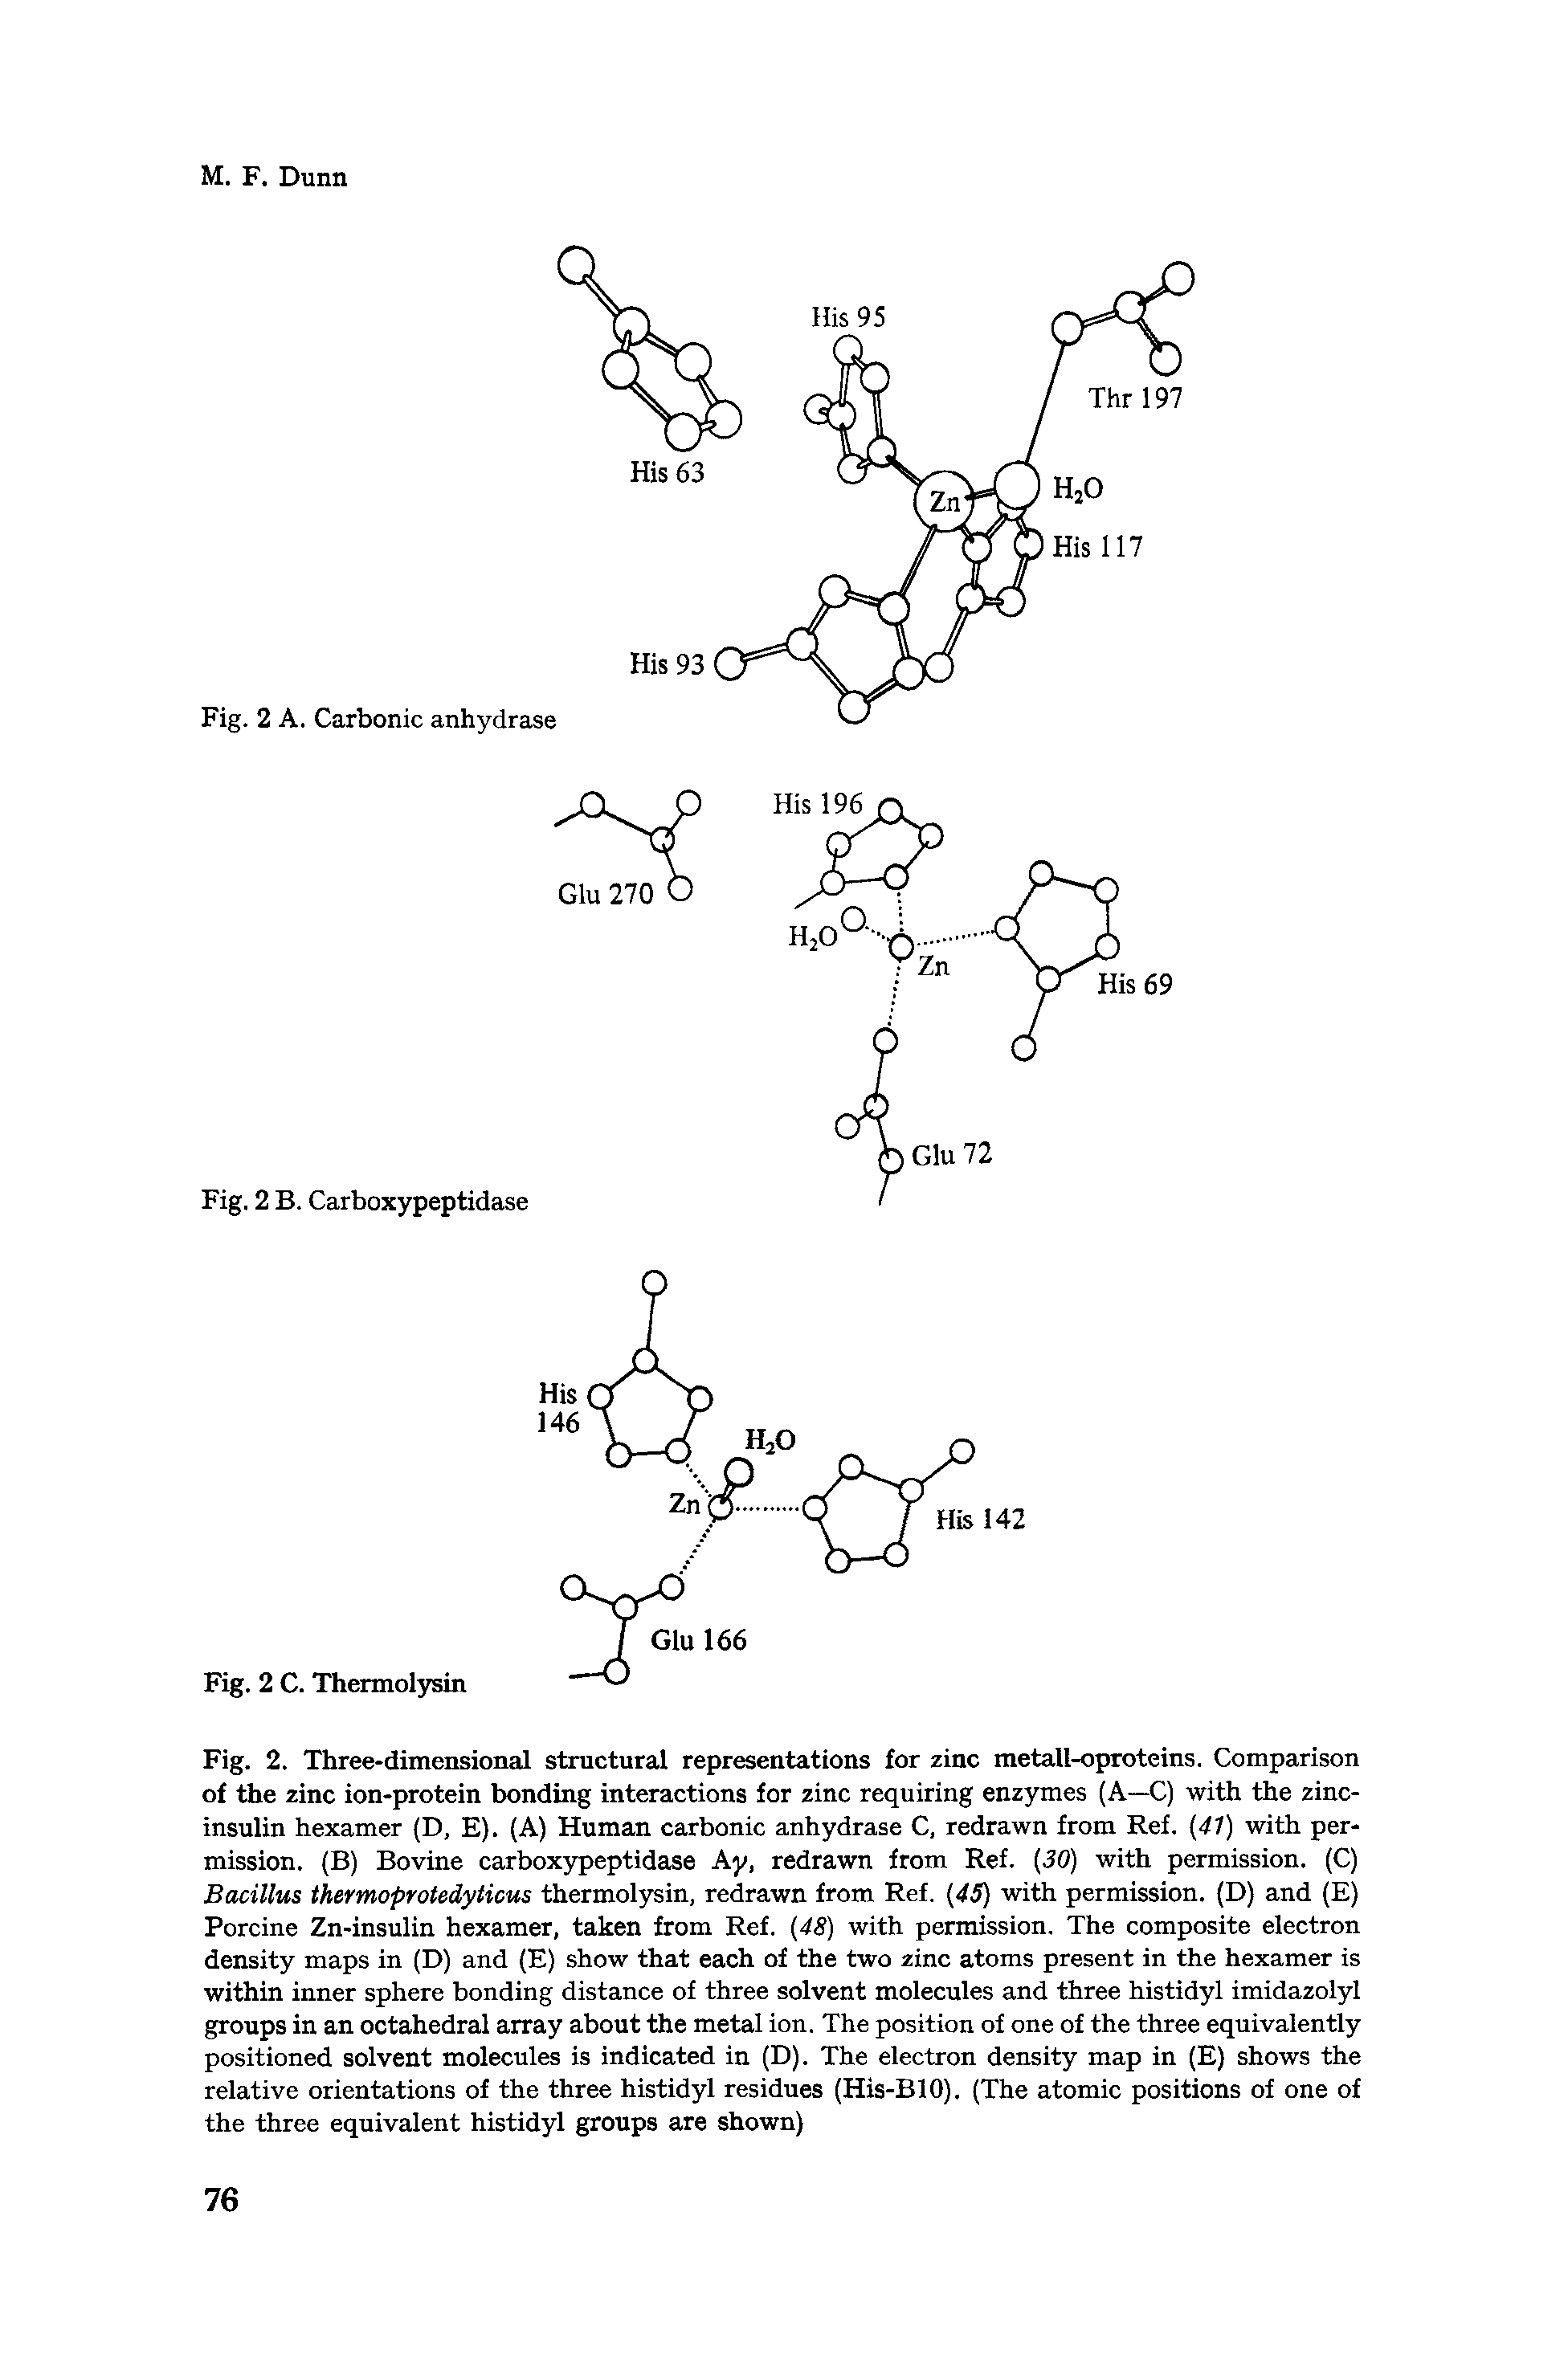 Fig. 2. Three-dimensional structural representations for zinc metall-oproteins. Comparison of the zinc ion-protein bonding interactions for zinc requiring enzymes (A—C) with the zinc-insulin hexamer (D, E). (A) Human carbonic anhydrase C, redrawn from Ref. (47) with permission. (B) Bovine carboxypeptidase Ay, redrawn from Ref. 30) with permission. (C) Bacillus thermoprotedyticus thermolysin, redrawn from Ref. 45) with permission. (D) and (E) Porcine Zn-insulin hexamer, taken from Ref. 48) with permission. The composite electron density maps in (D) and (E) show that each of the two zinc atoms present in the hexamer is within inner sphere bonding distance of three solvent molecules and three histidyl imidazolyl groups in an octahedral array about the metal ion. The position of one of the three equivalently positioned solvent molecules is indicated in (D). The electron density map in (E) shows the relative orientations of the three histidyl residues (His-BlO). (The atomic positions of one of the three equivalent histidyl groups are shown)...